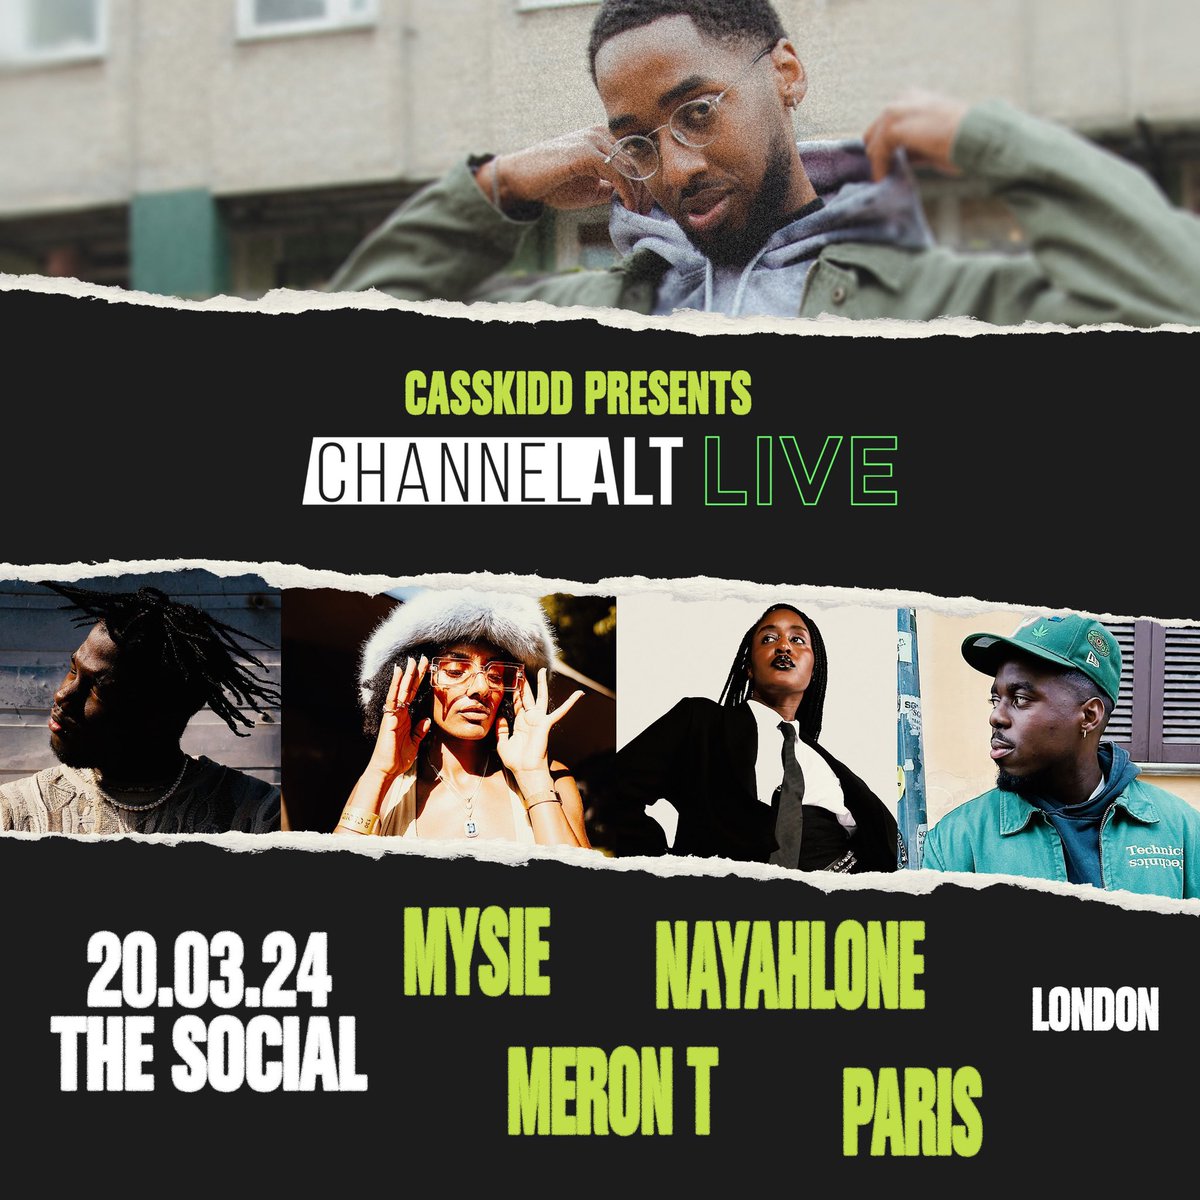 📣 MARCH 20TH 2024 - LONDON 🇬🇧📍 There’s one thing discovering artists, another thing is supporting them in person! Proud to showcase the @ChannelAltHQ line up featuring, @nayahlone, @mezthehun, @mmmmysie & @parismatiq for #ChannelAltLIVE 🎫 comm.tix.to/ChannelAlt 🎫